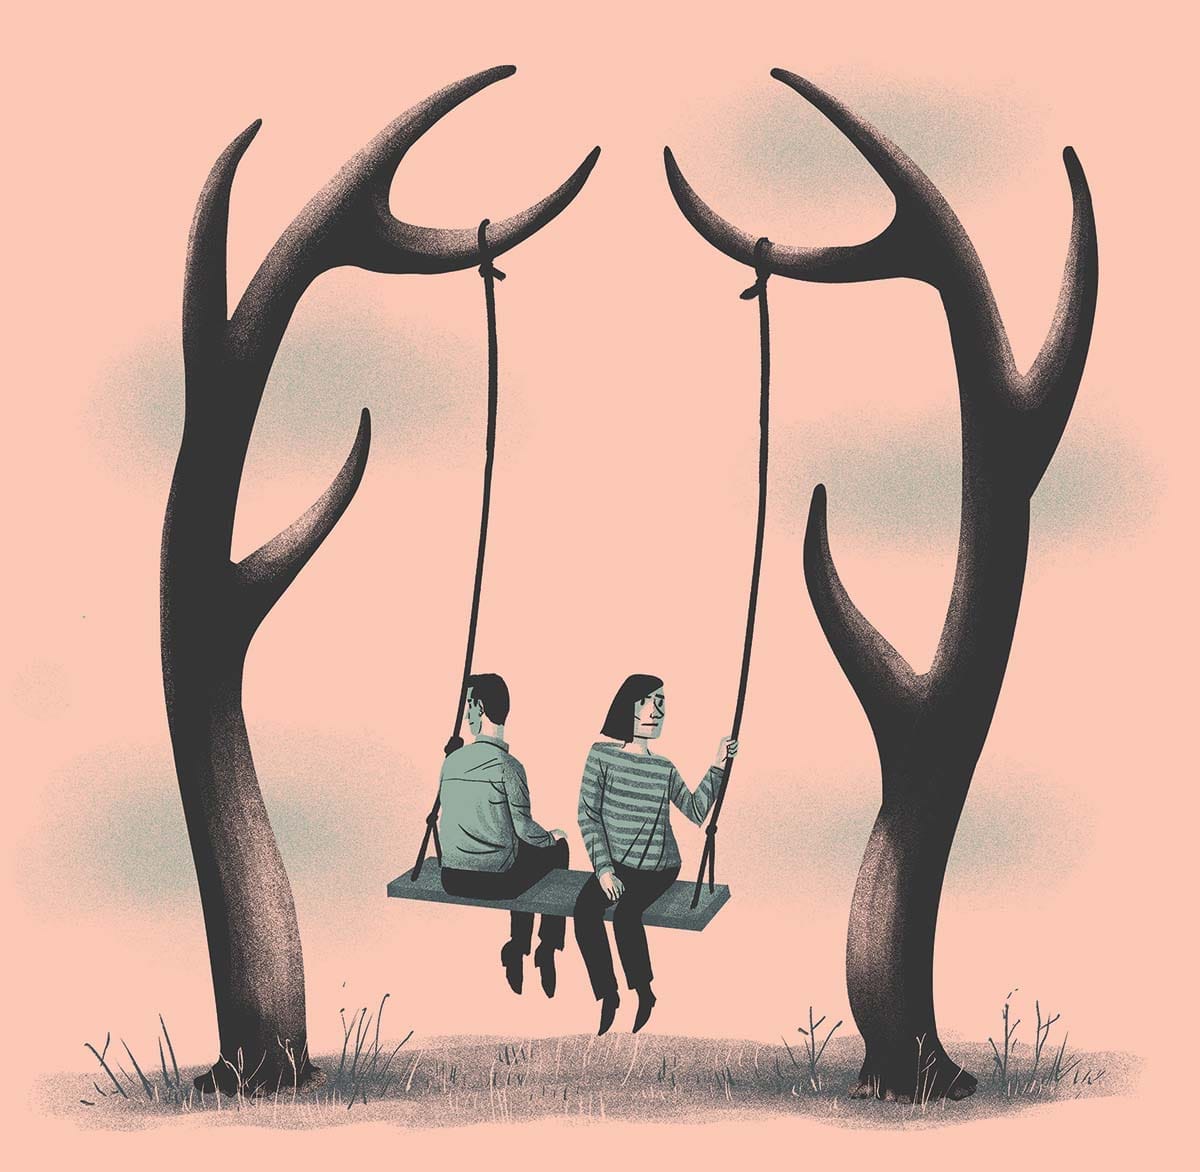 Decorative illustration of two people sitting on a swing that is hung between two antlers acting as poles.